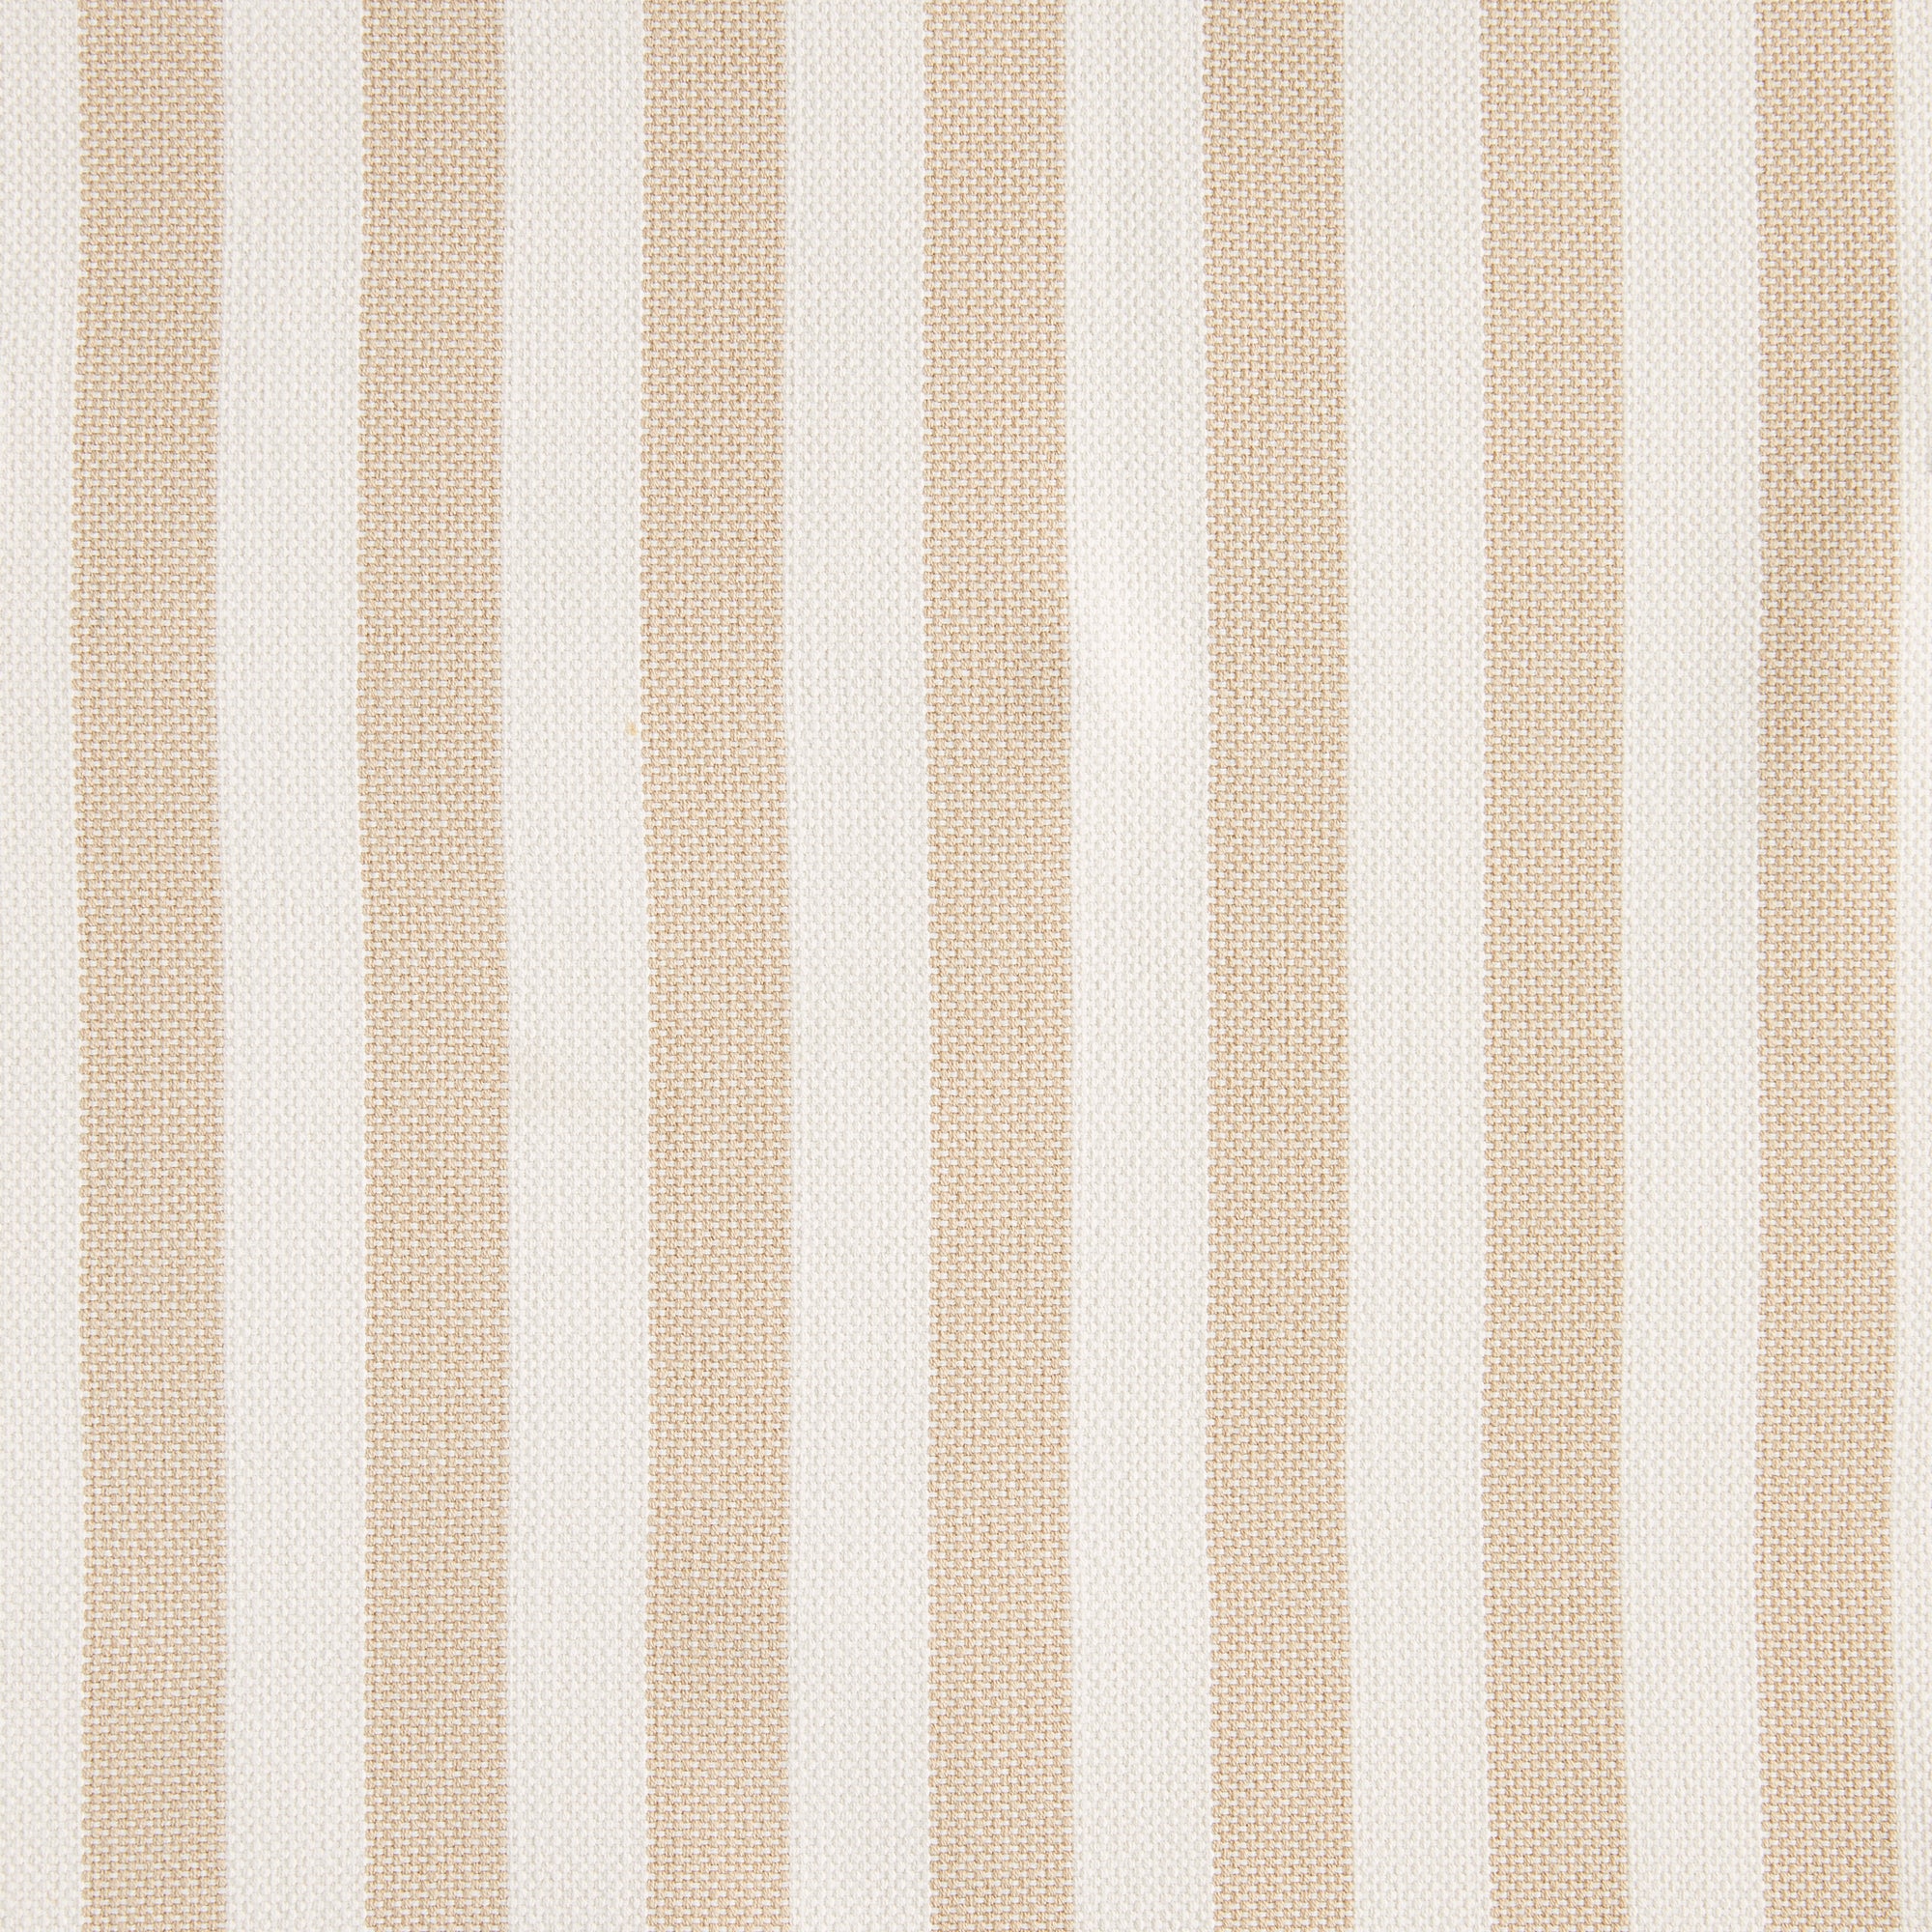 Even Stripe Sand - Fabric By The Yard